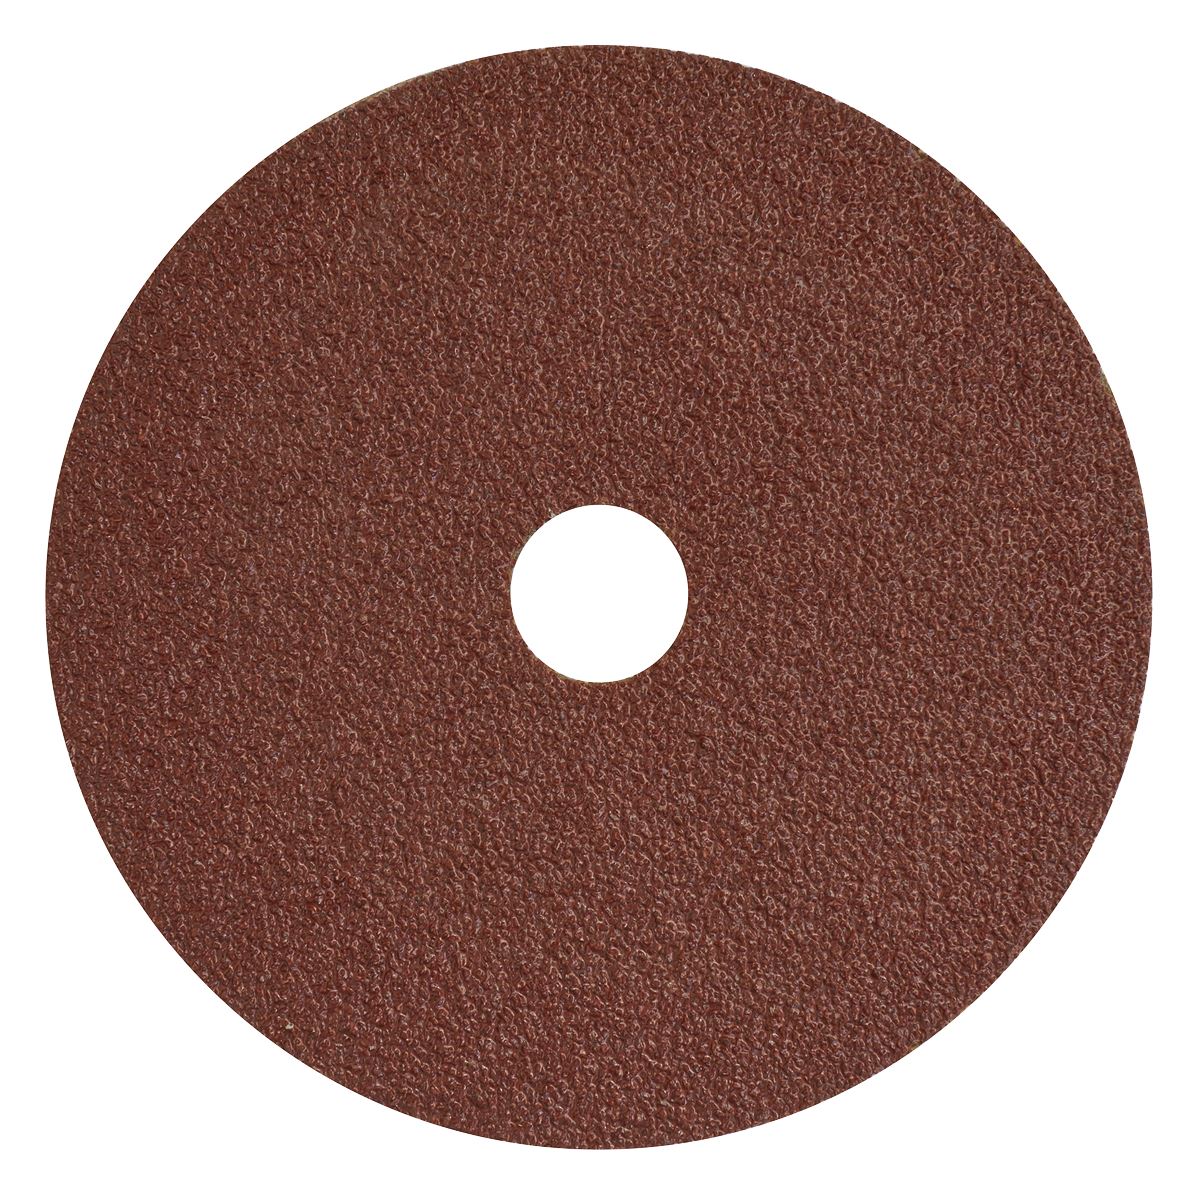 Worksafe by Sealey Fibre Backed Disc Ø115mm - 40Grit Pack of 25